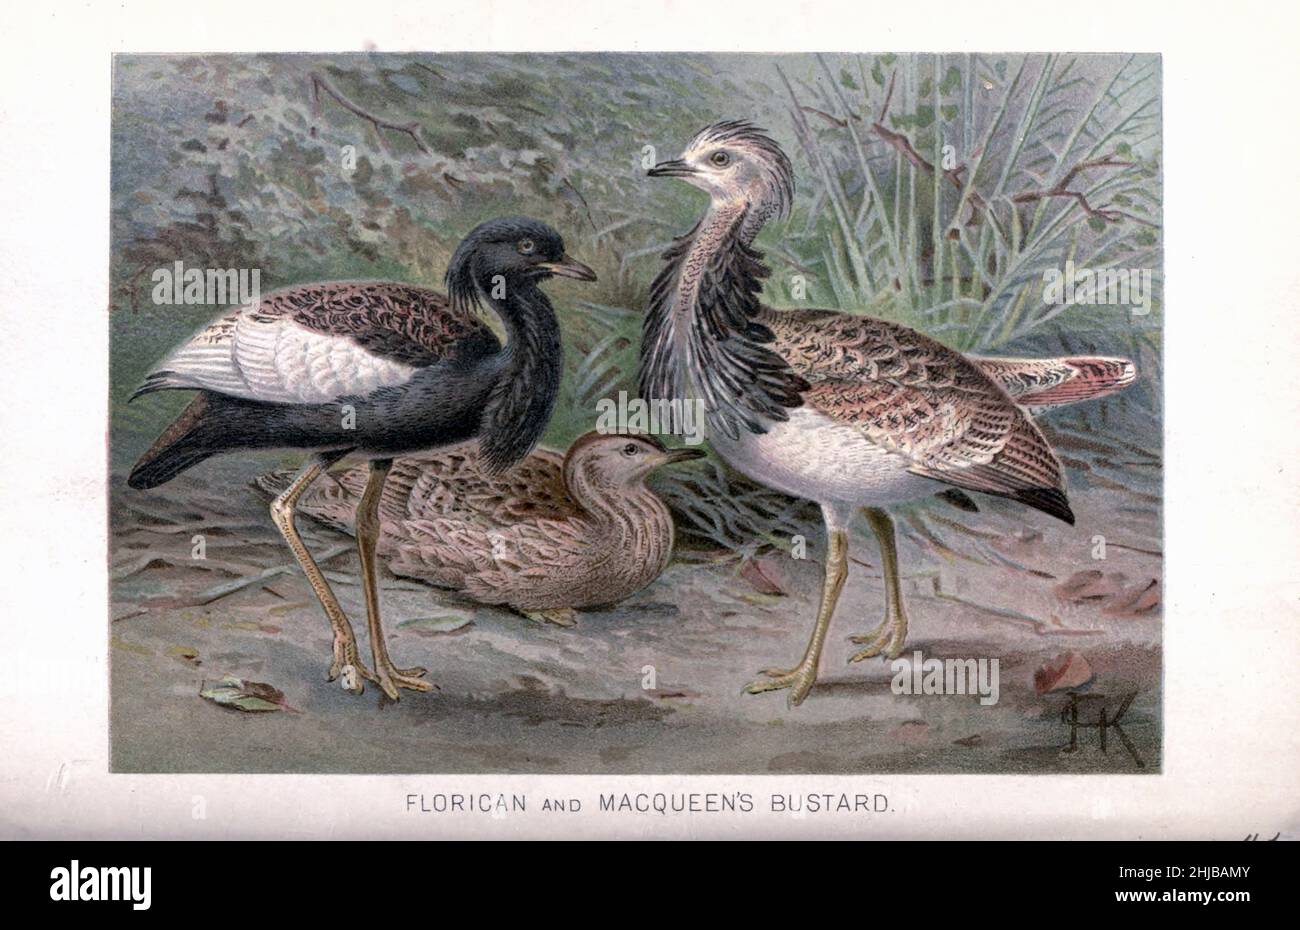 Florican and Macqueen's Bustard (Chlamydotis macqueenii) Illustrated by Johannes Gerardus Keulemans (J. G. Keulemans) from the The royal natural history edited by Richard Lydekker, Volume IV published in 1895 Stock Photo